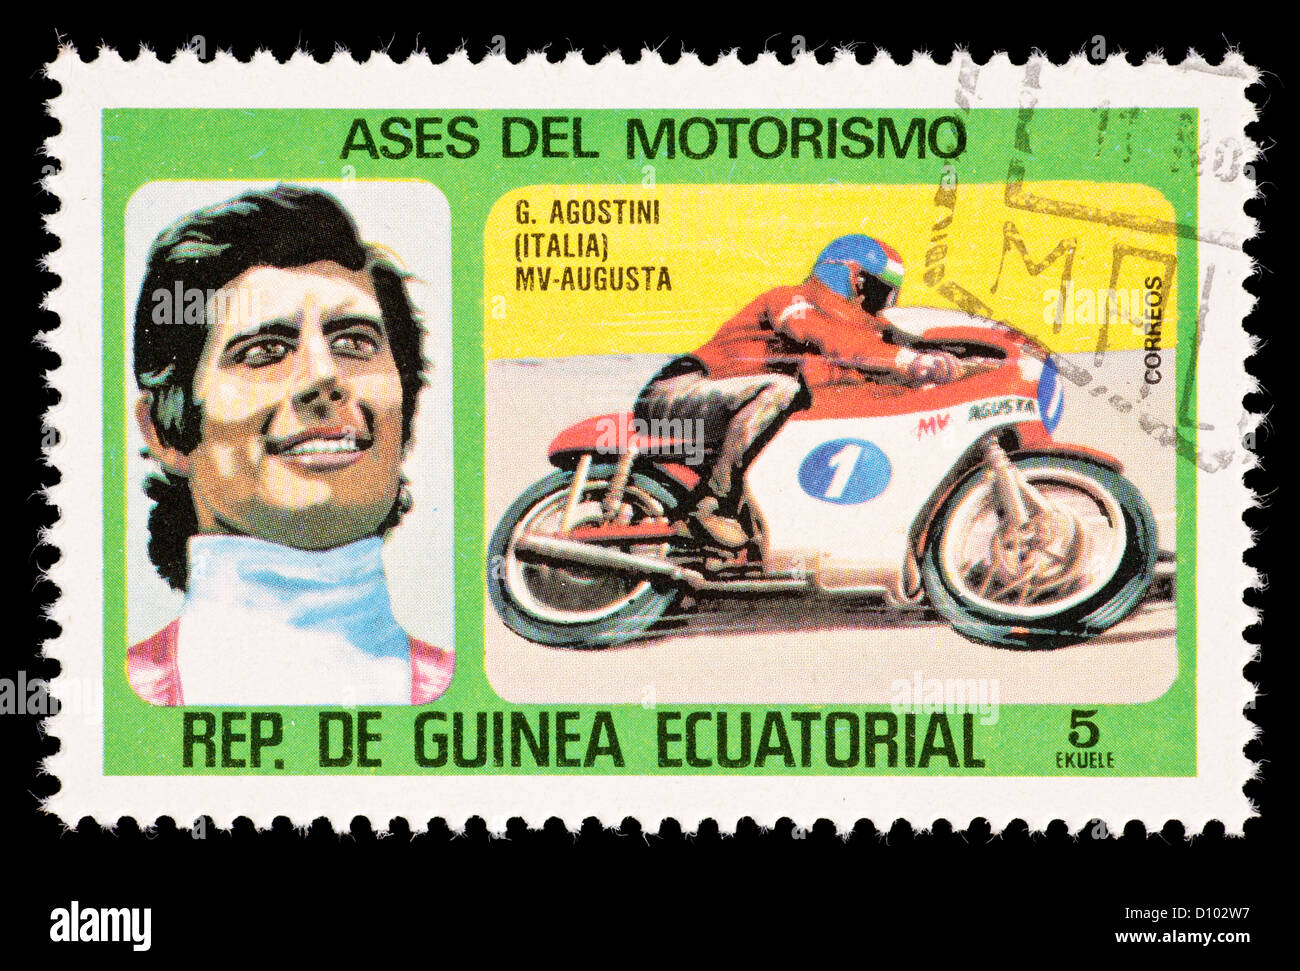 Postage stamp from Equatorial Guinea depicting a motorcyclist Stock Photo